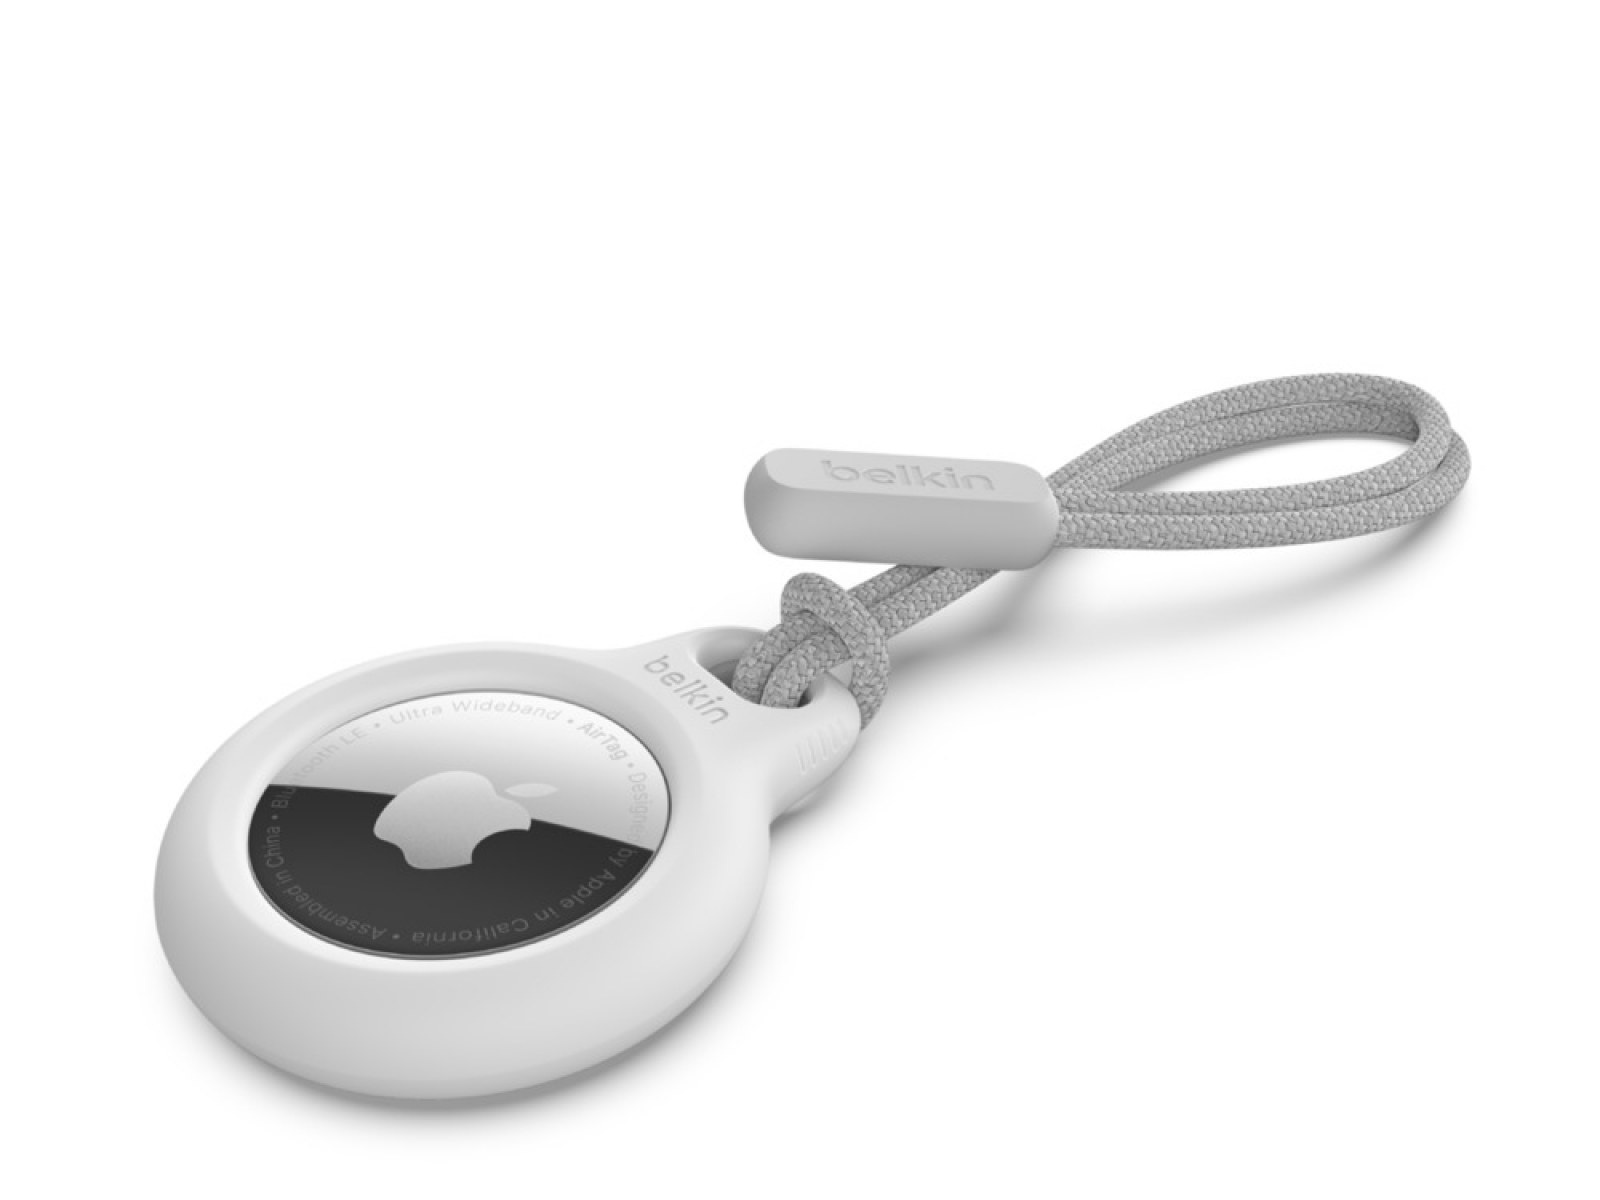 AirTag Accessories: Keyrings and Holders for Apple's AirTags - MacRumors